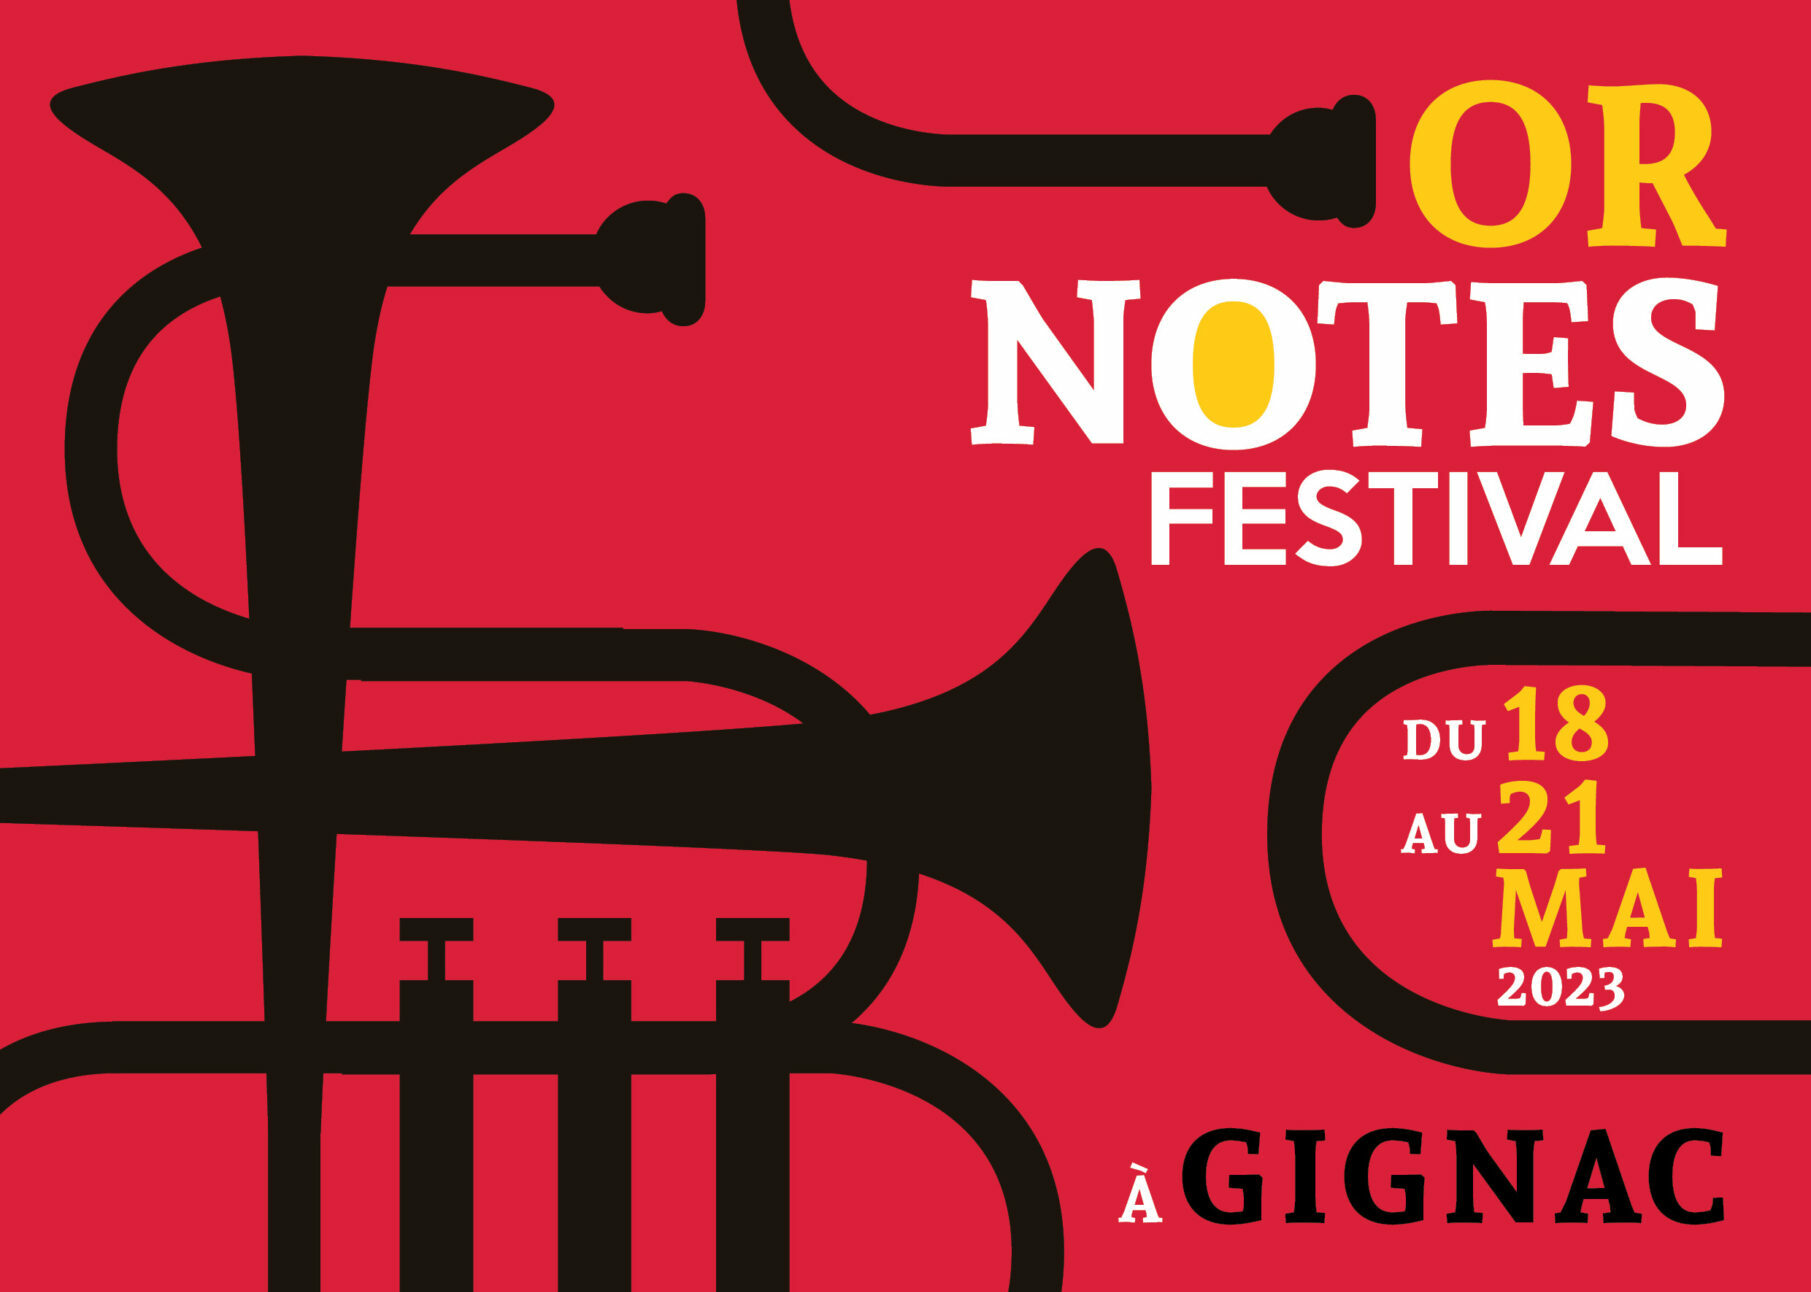 Atelier musical Or notes festival